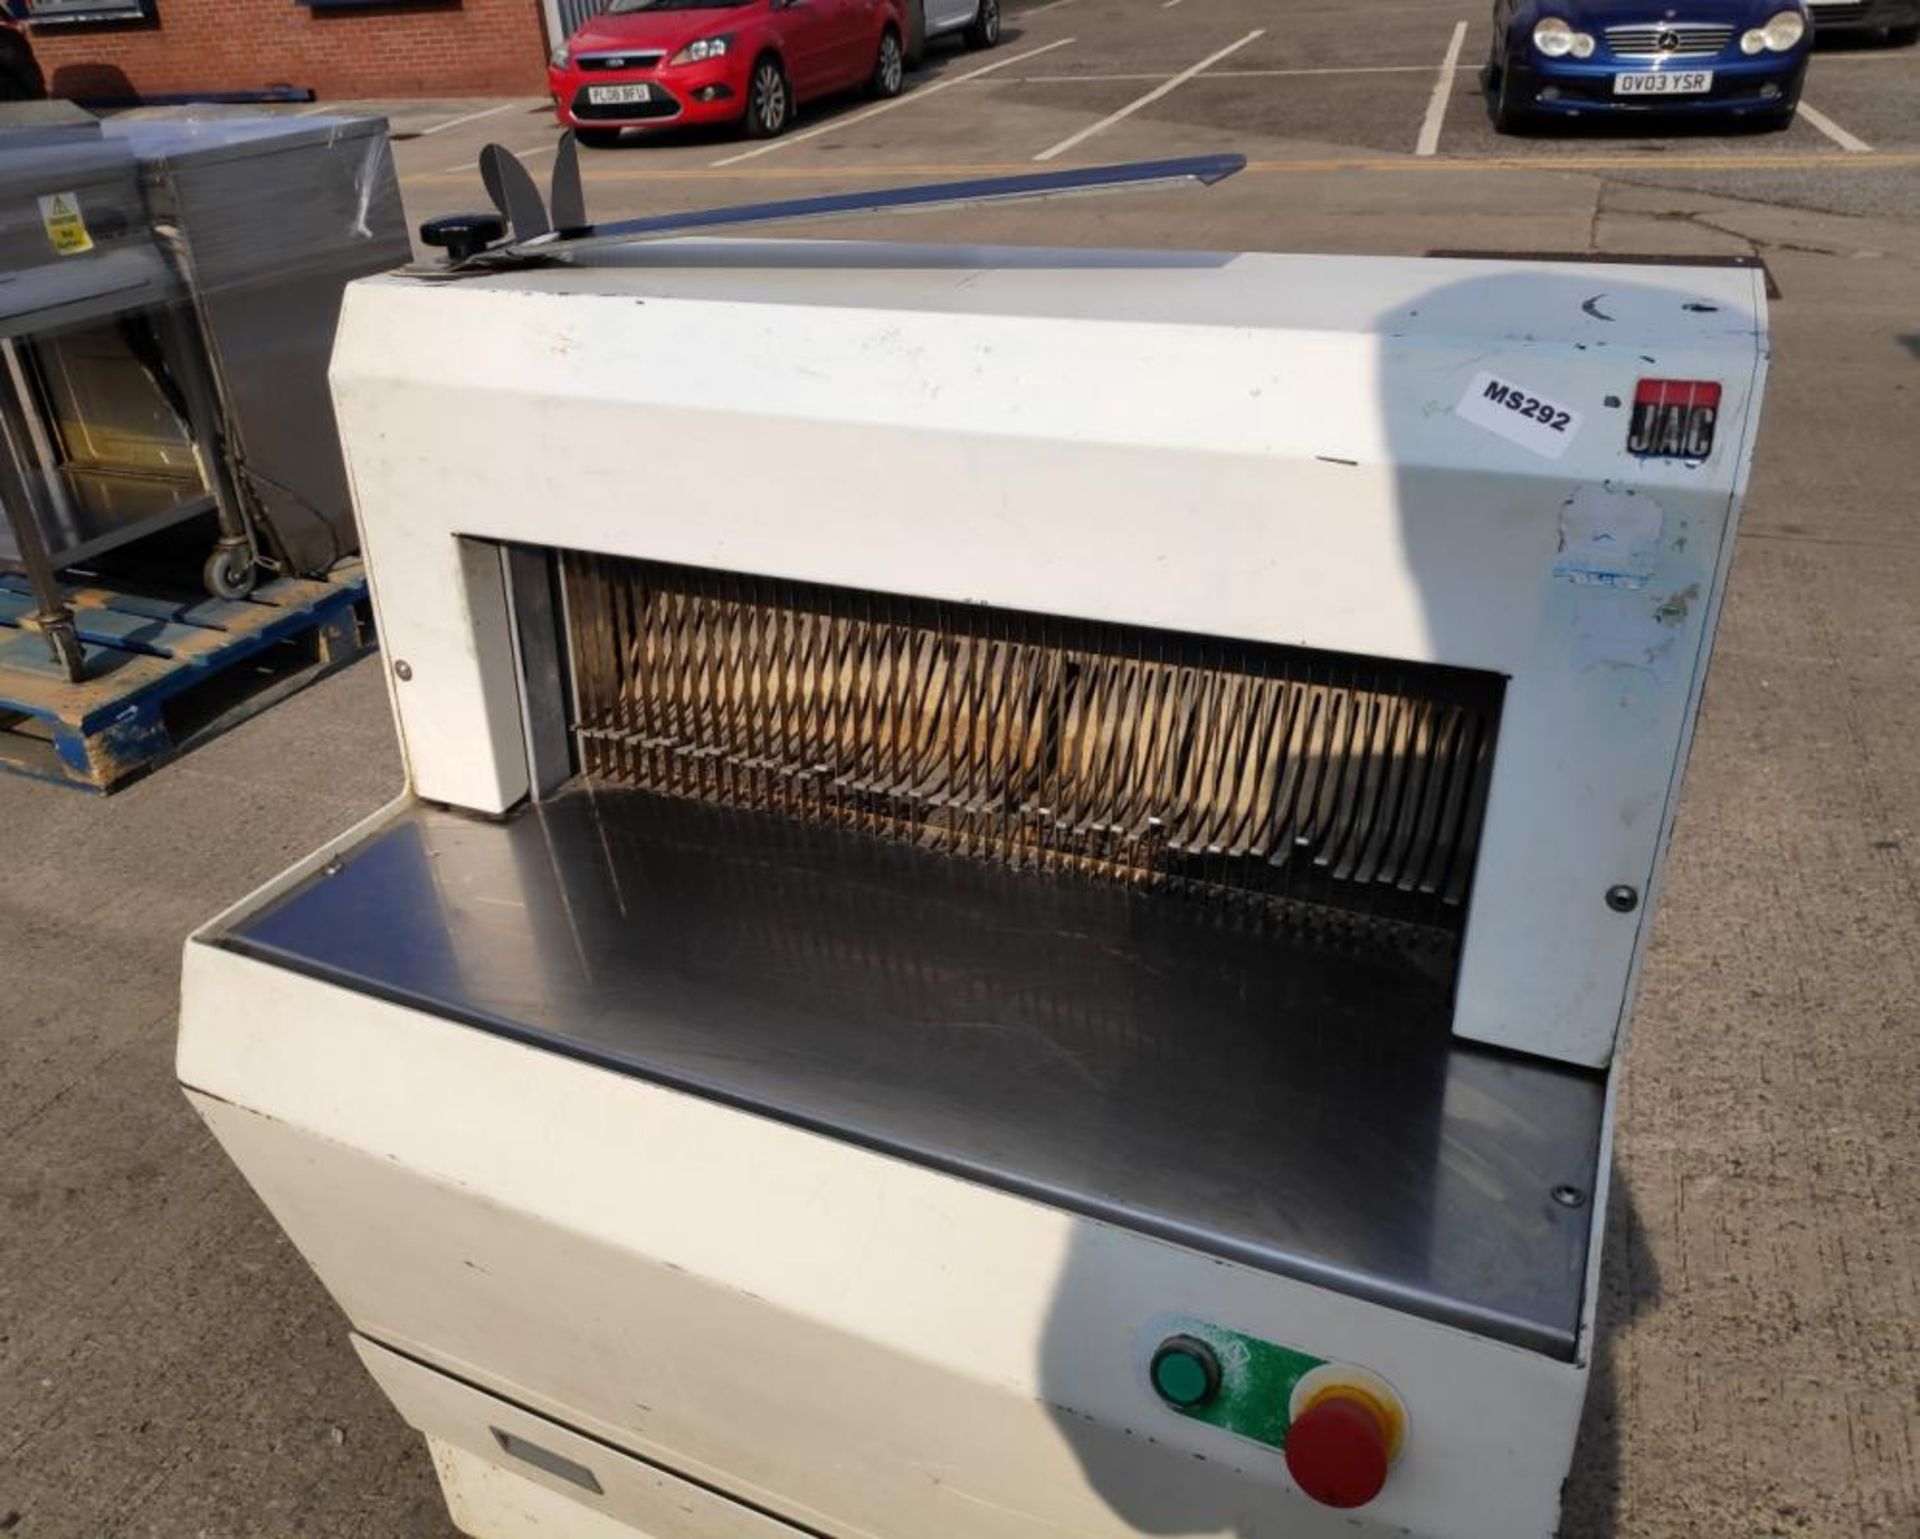 1 x JAC EEK 600/12 Single Phase Bread Slicer - Dimensions: 118L x 80H x 79W cm - Very Recently Remov - Image 14 of 14